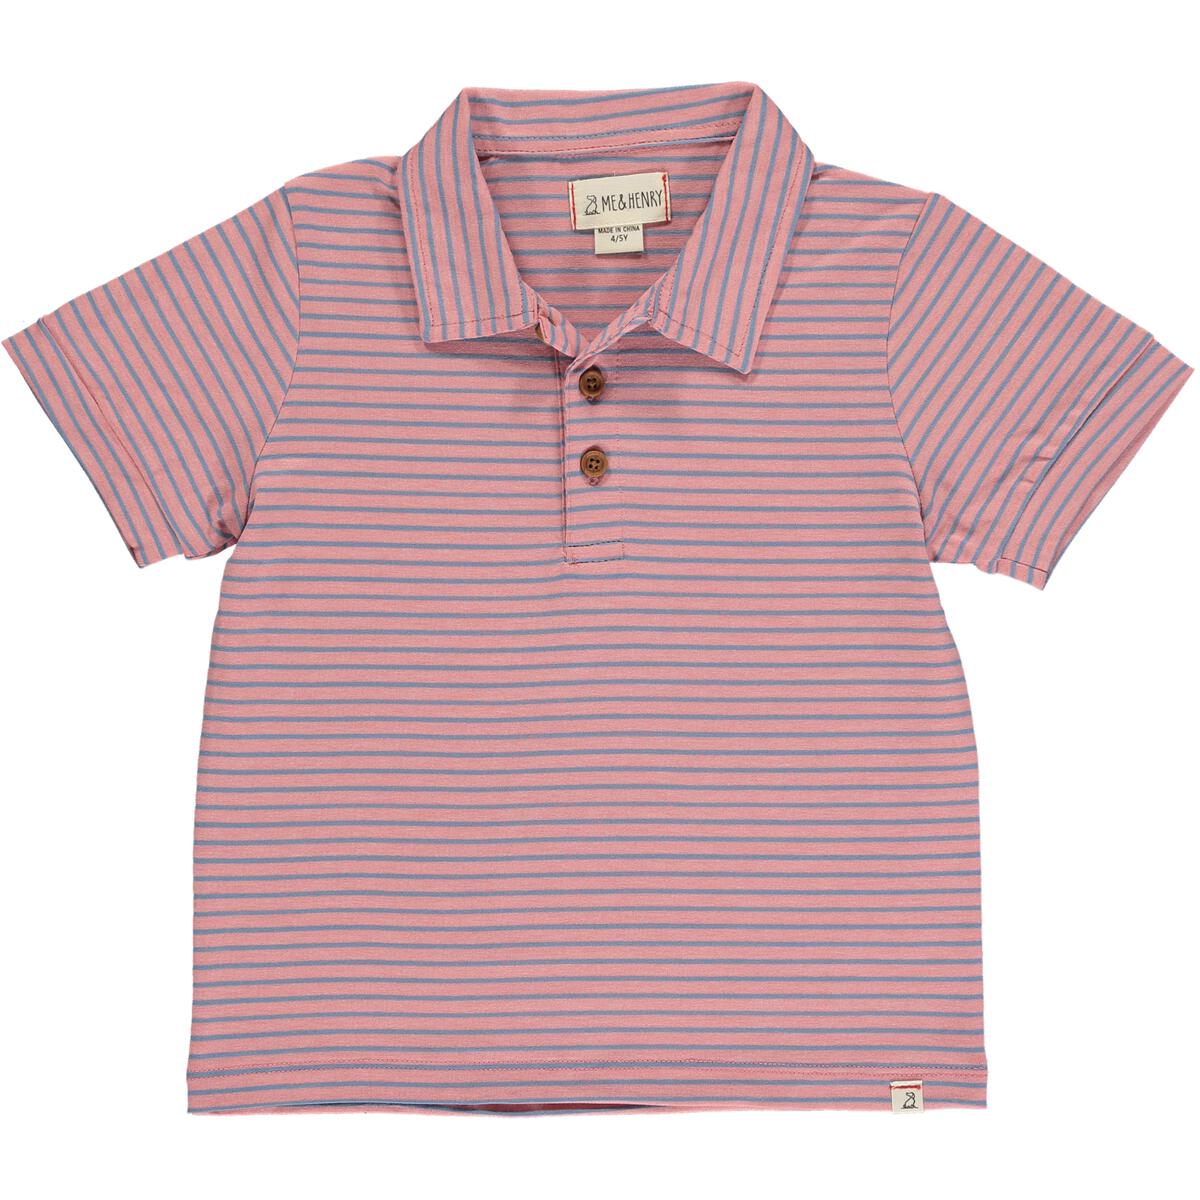 Me & Henry Flagstaff Polo in Pink/royal multi stripe